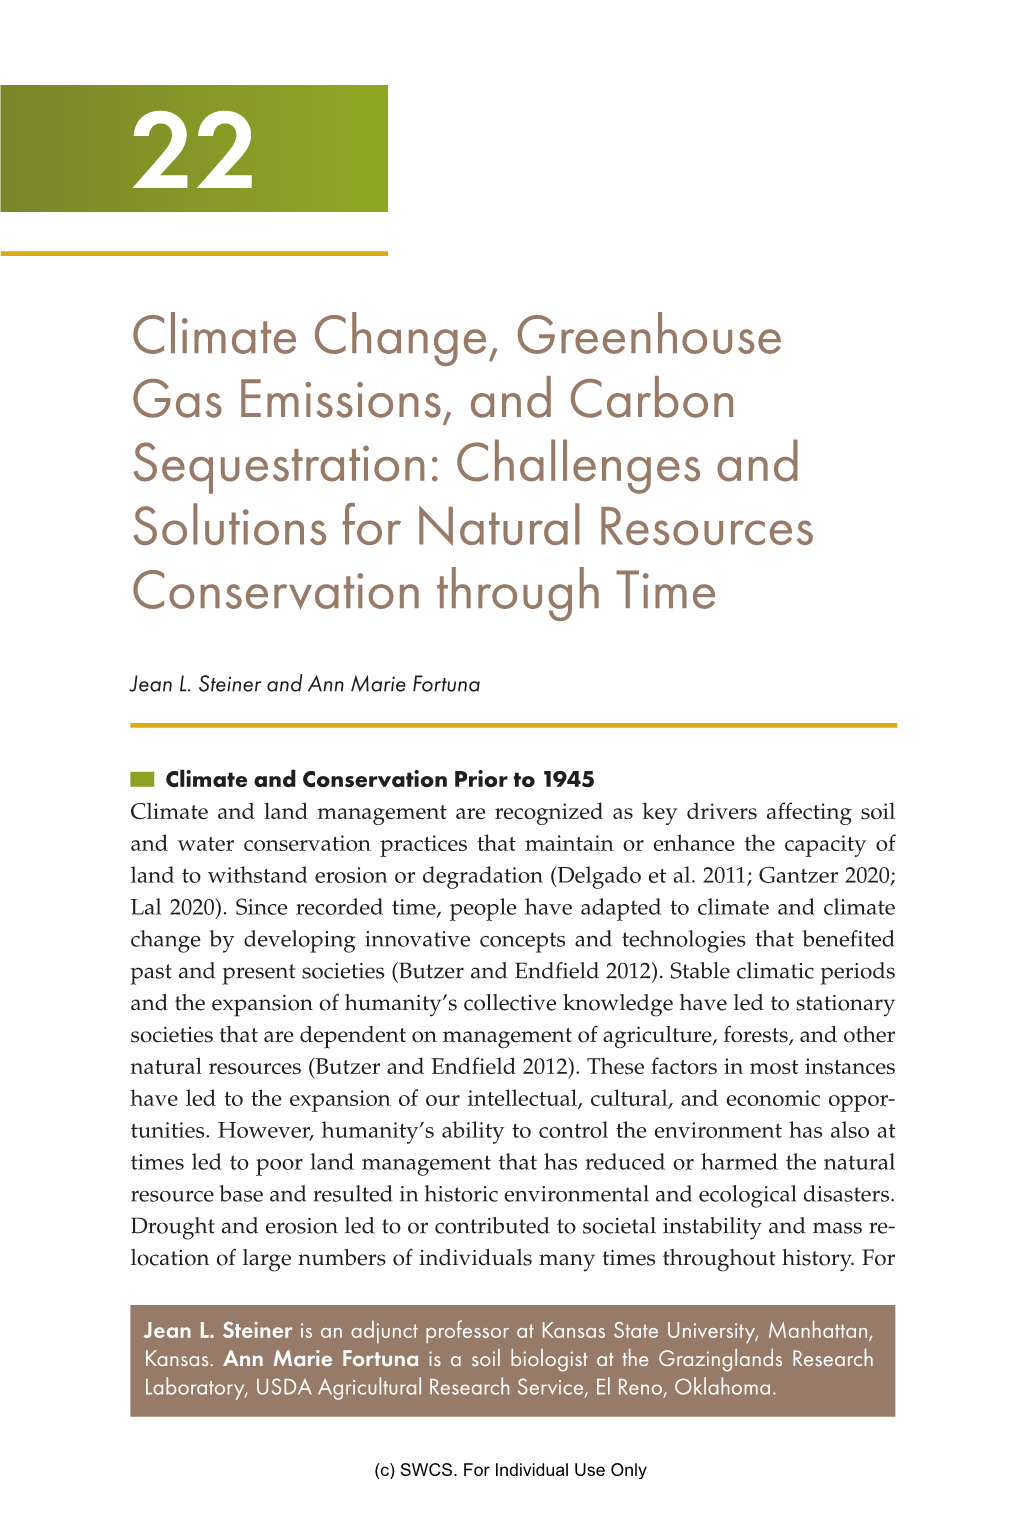 Climate Change, Greenhouse Gas Emissions, and Carbon Sequestration: Challenges and Solutions for Natural Resources Conservation Through Time